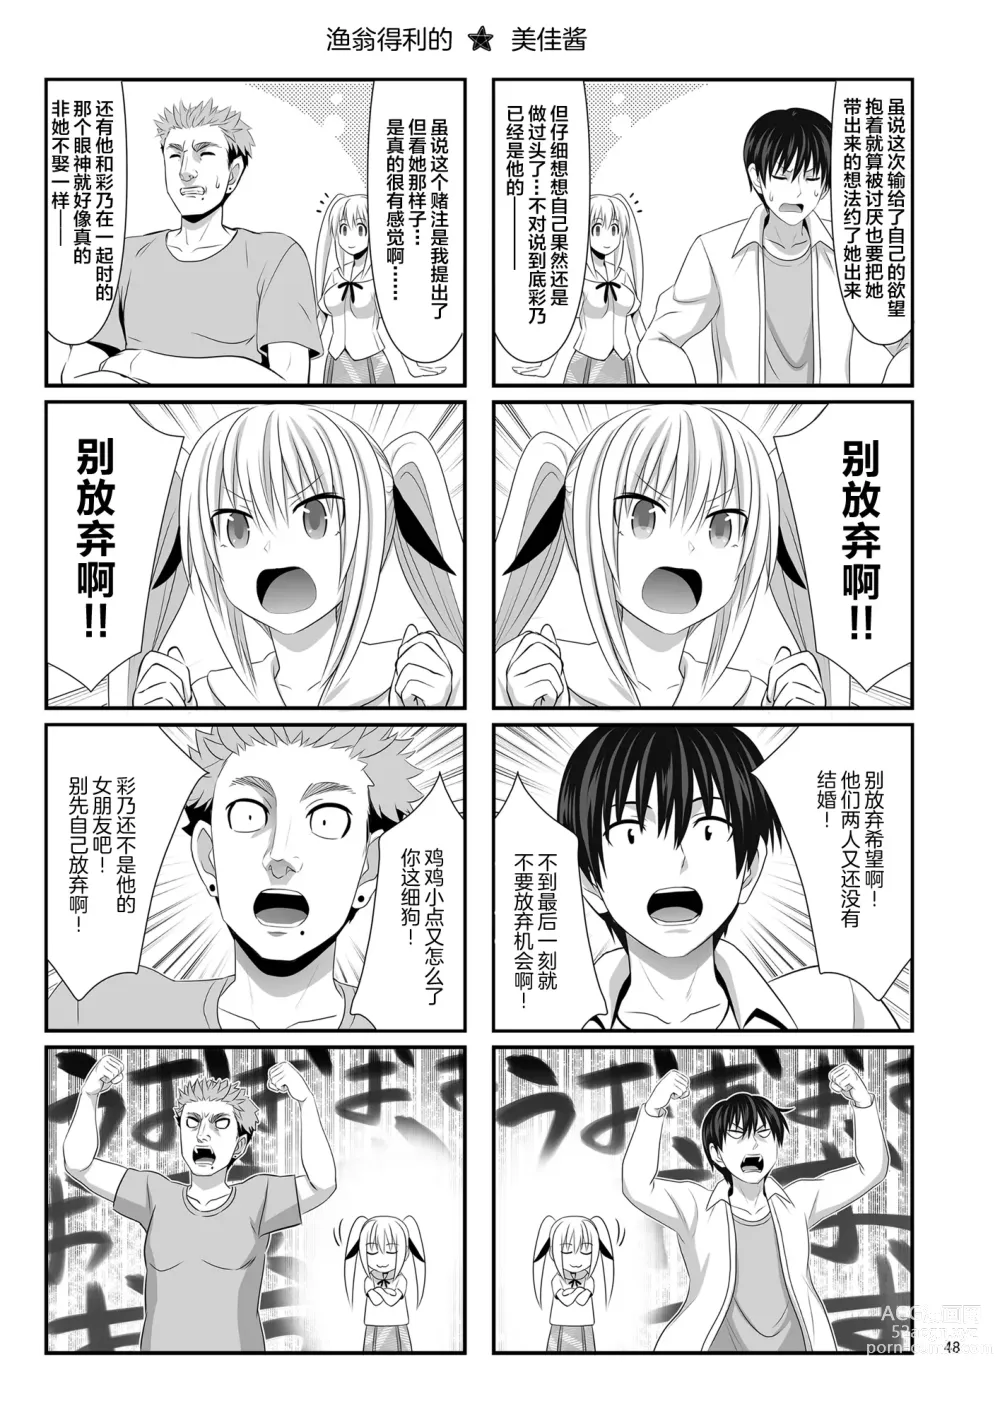 Page 49 of doujinshi SEX FRIEND 6